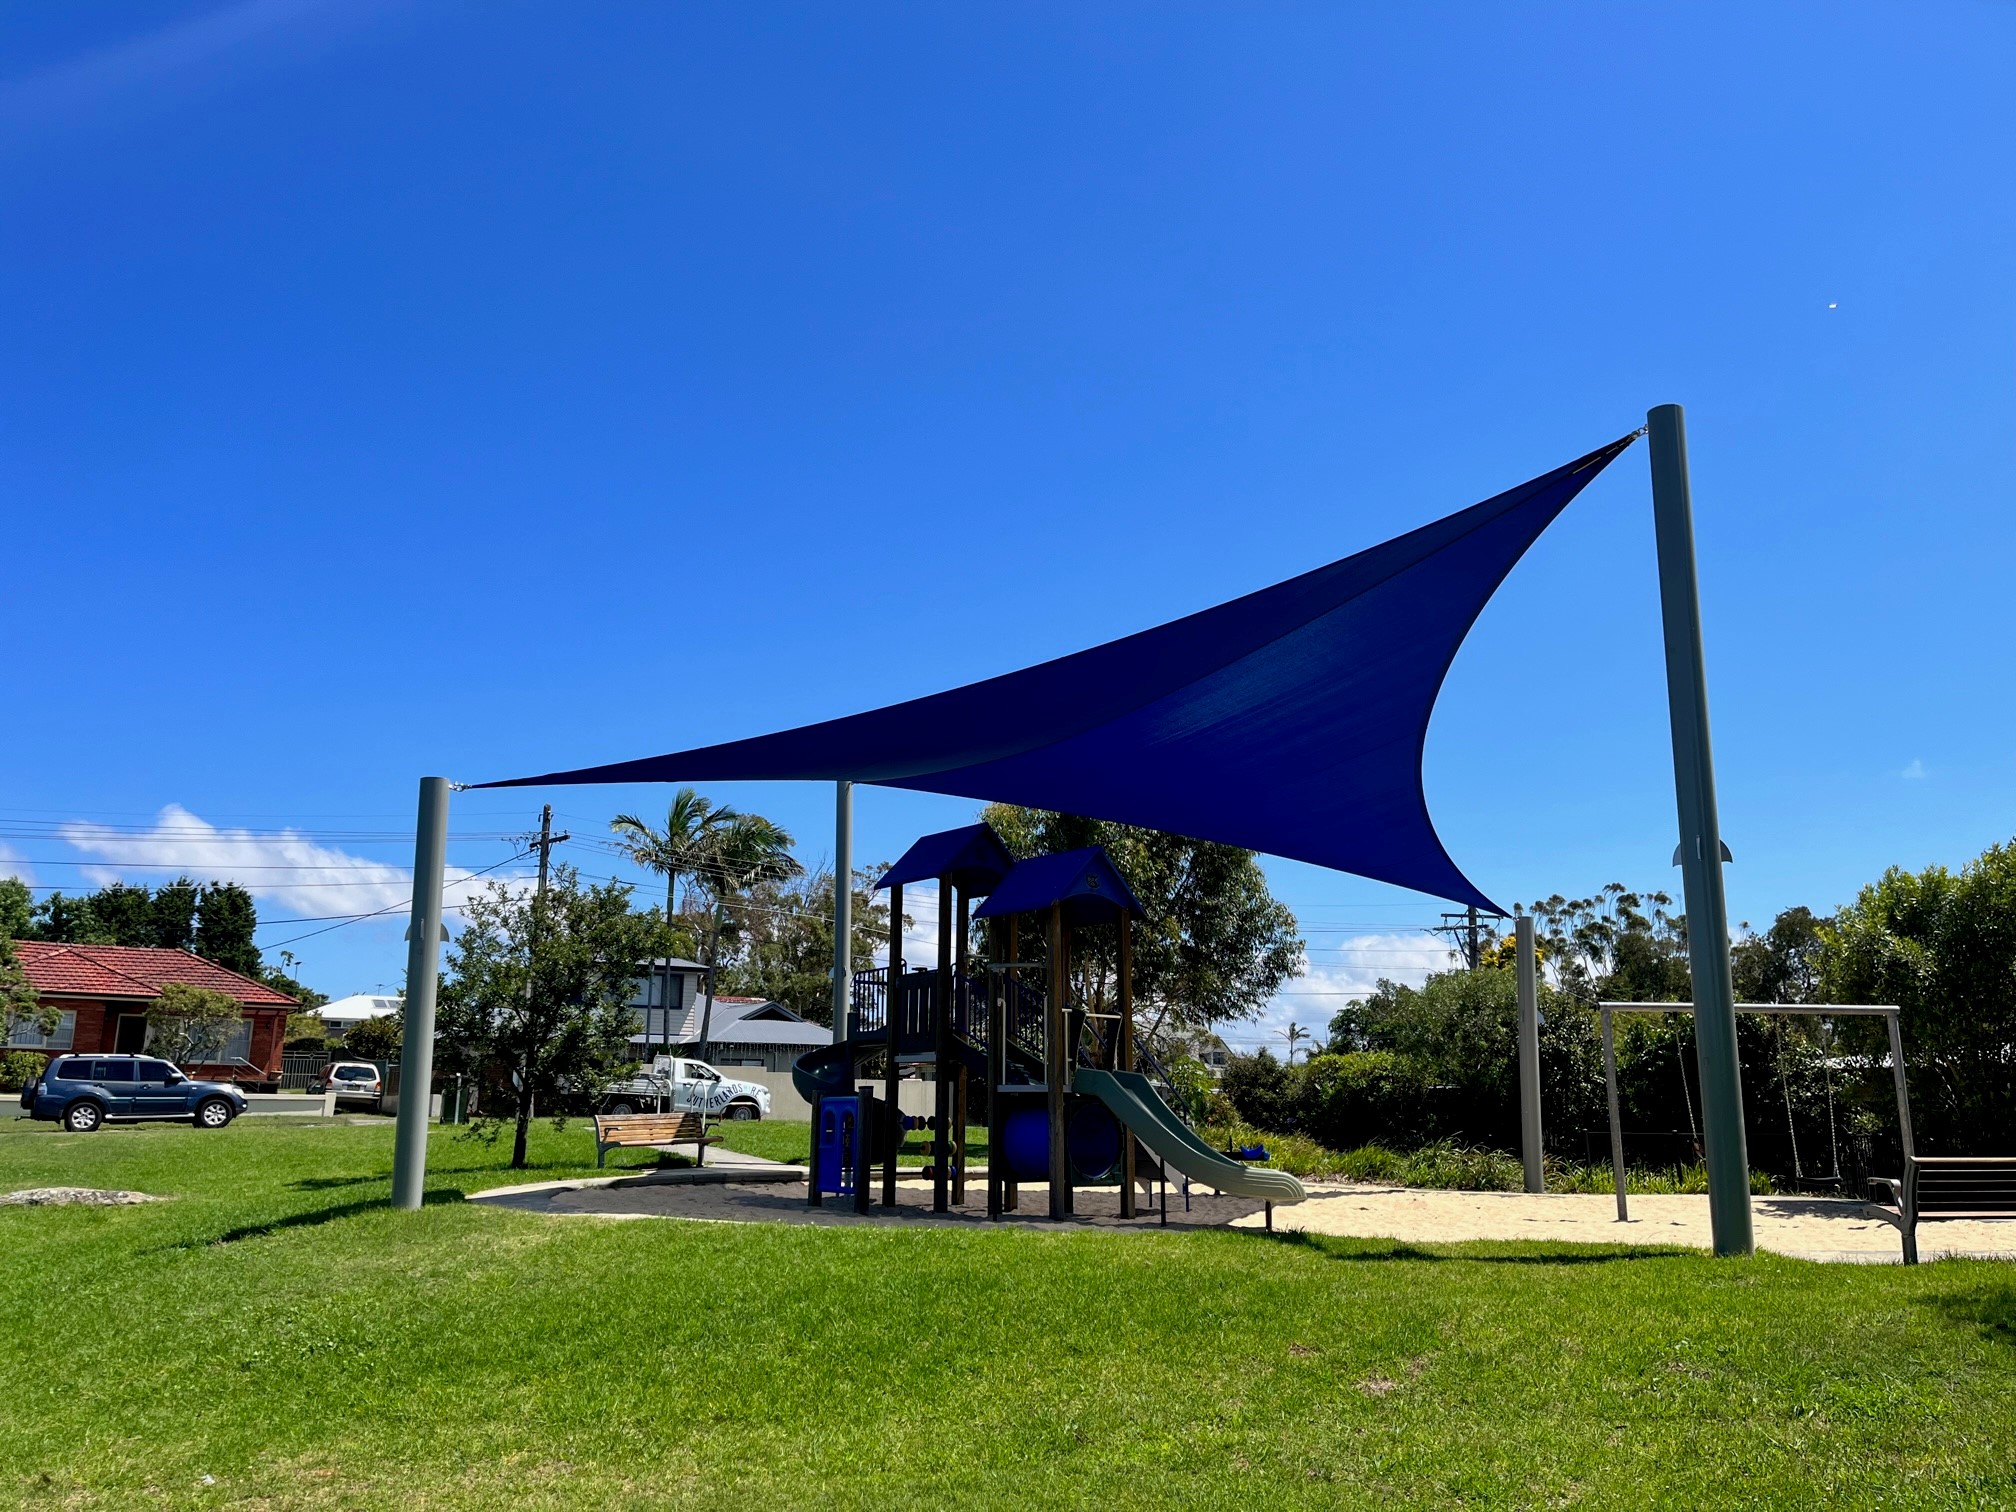 Shaded playground with tower, slides and swings